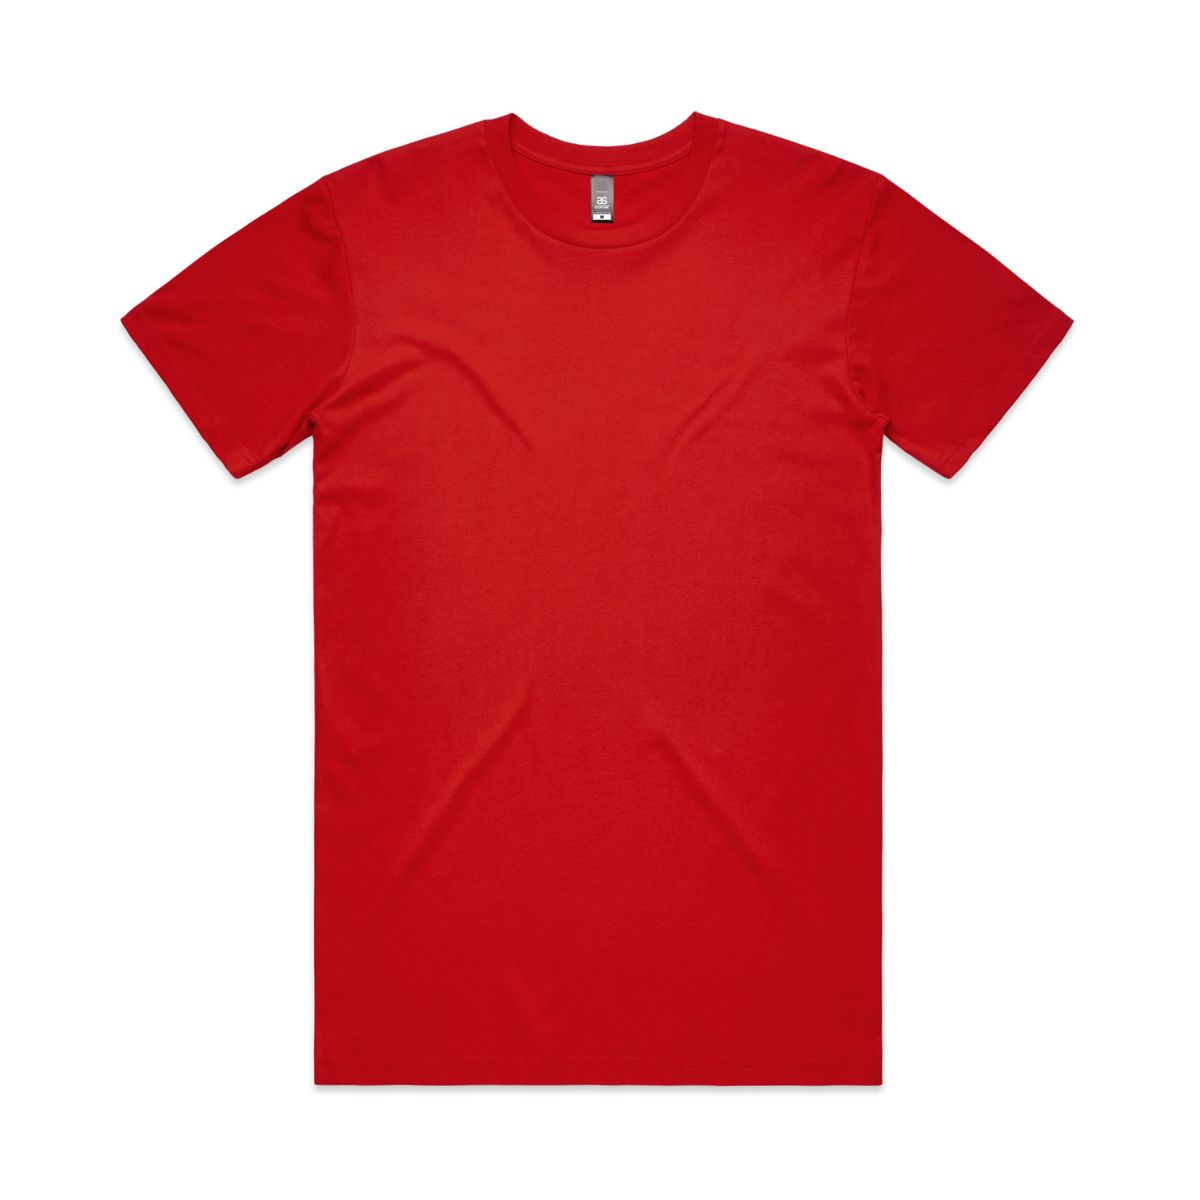 ascolour Men's Staple Tee - Red and Pink Shades 5001